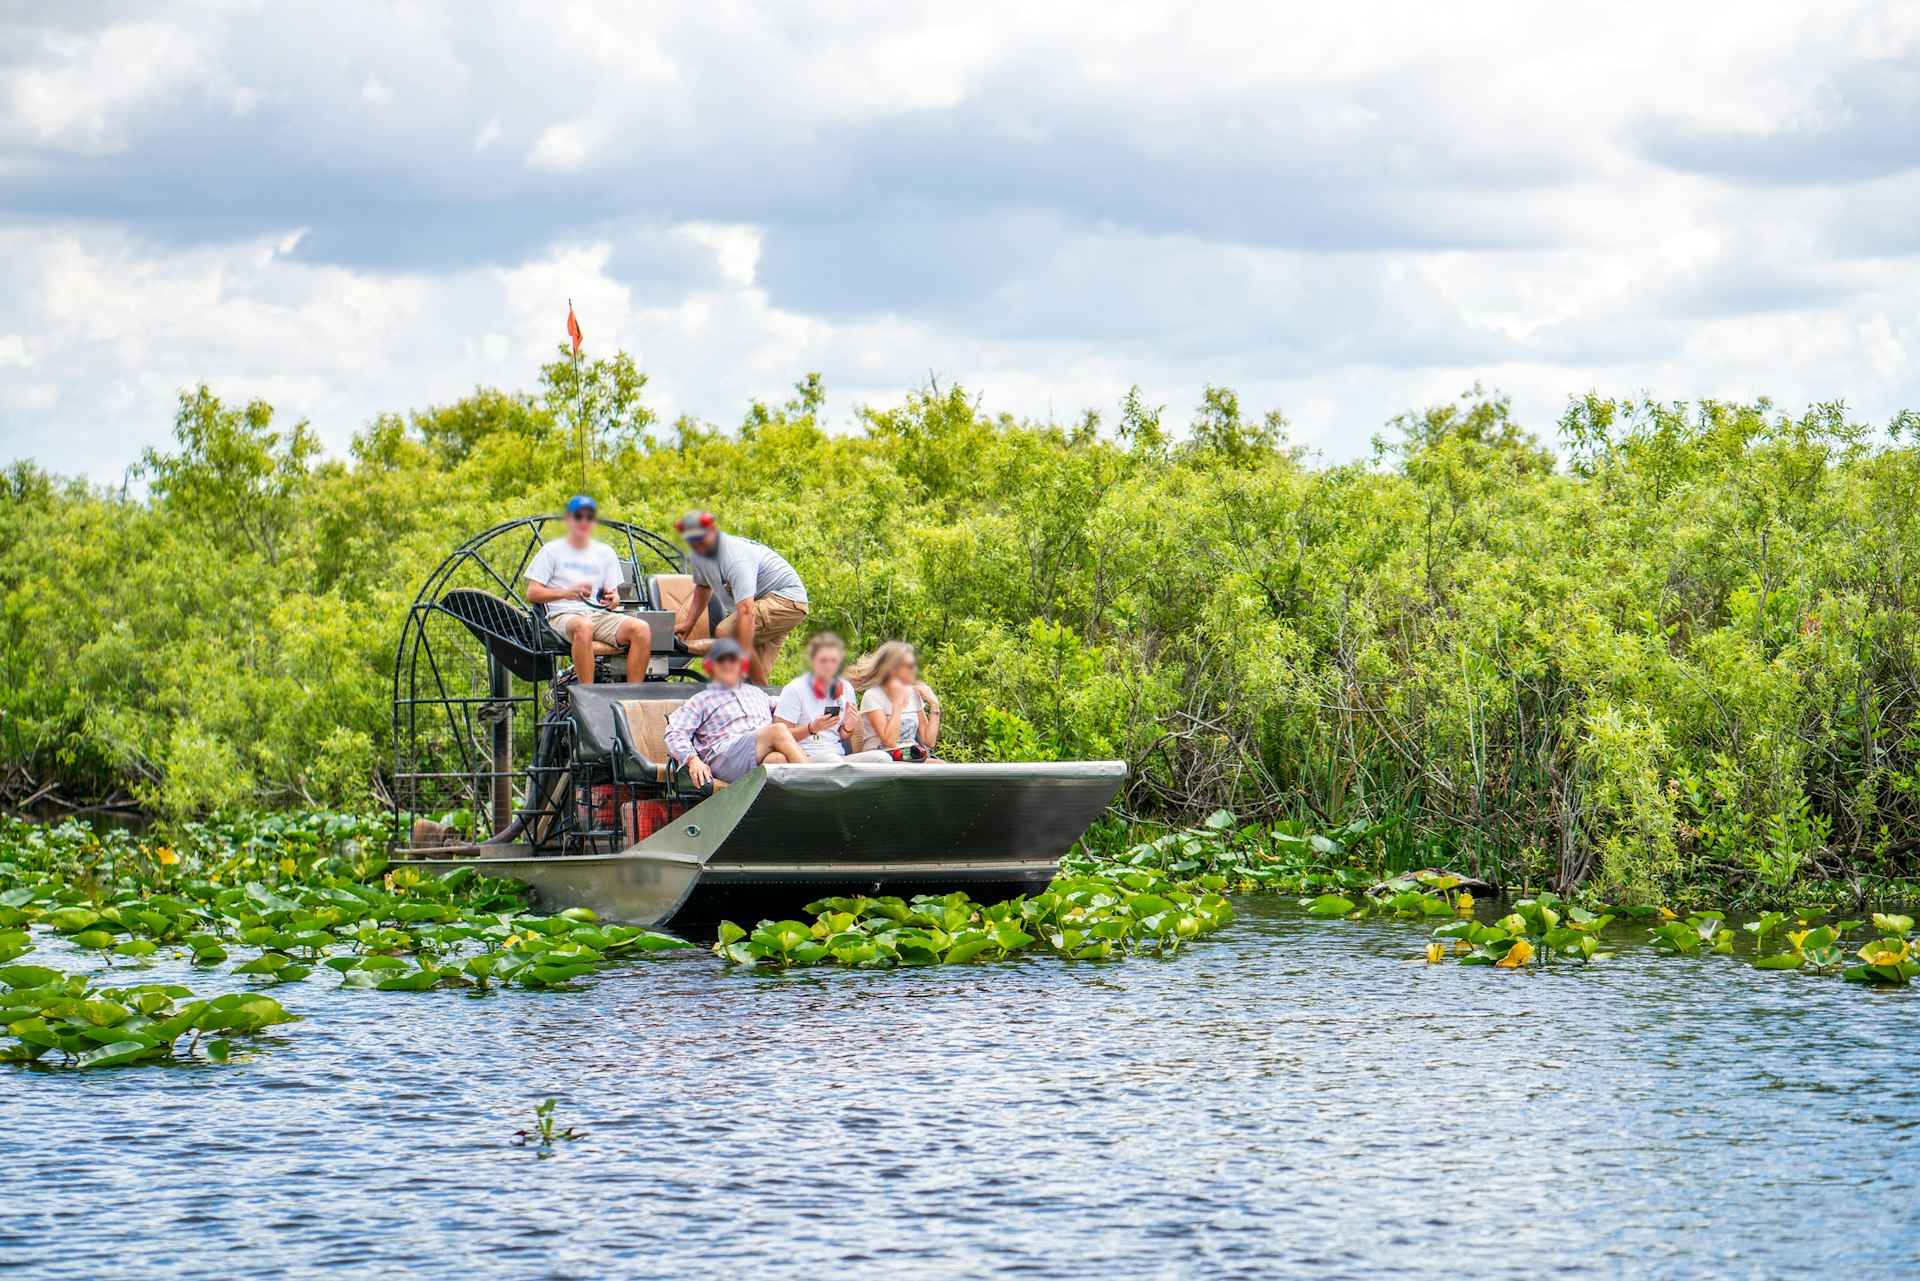 A group of tourists in a hovercraft in the wetlands of Everglades National Park, Florida, USA